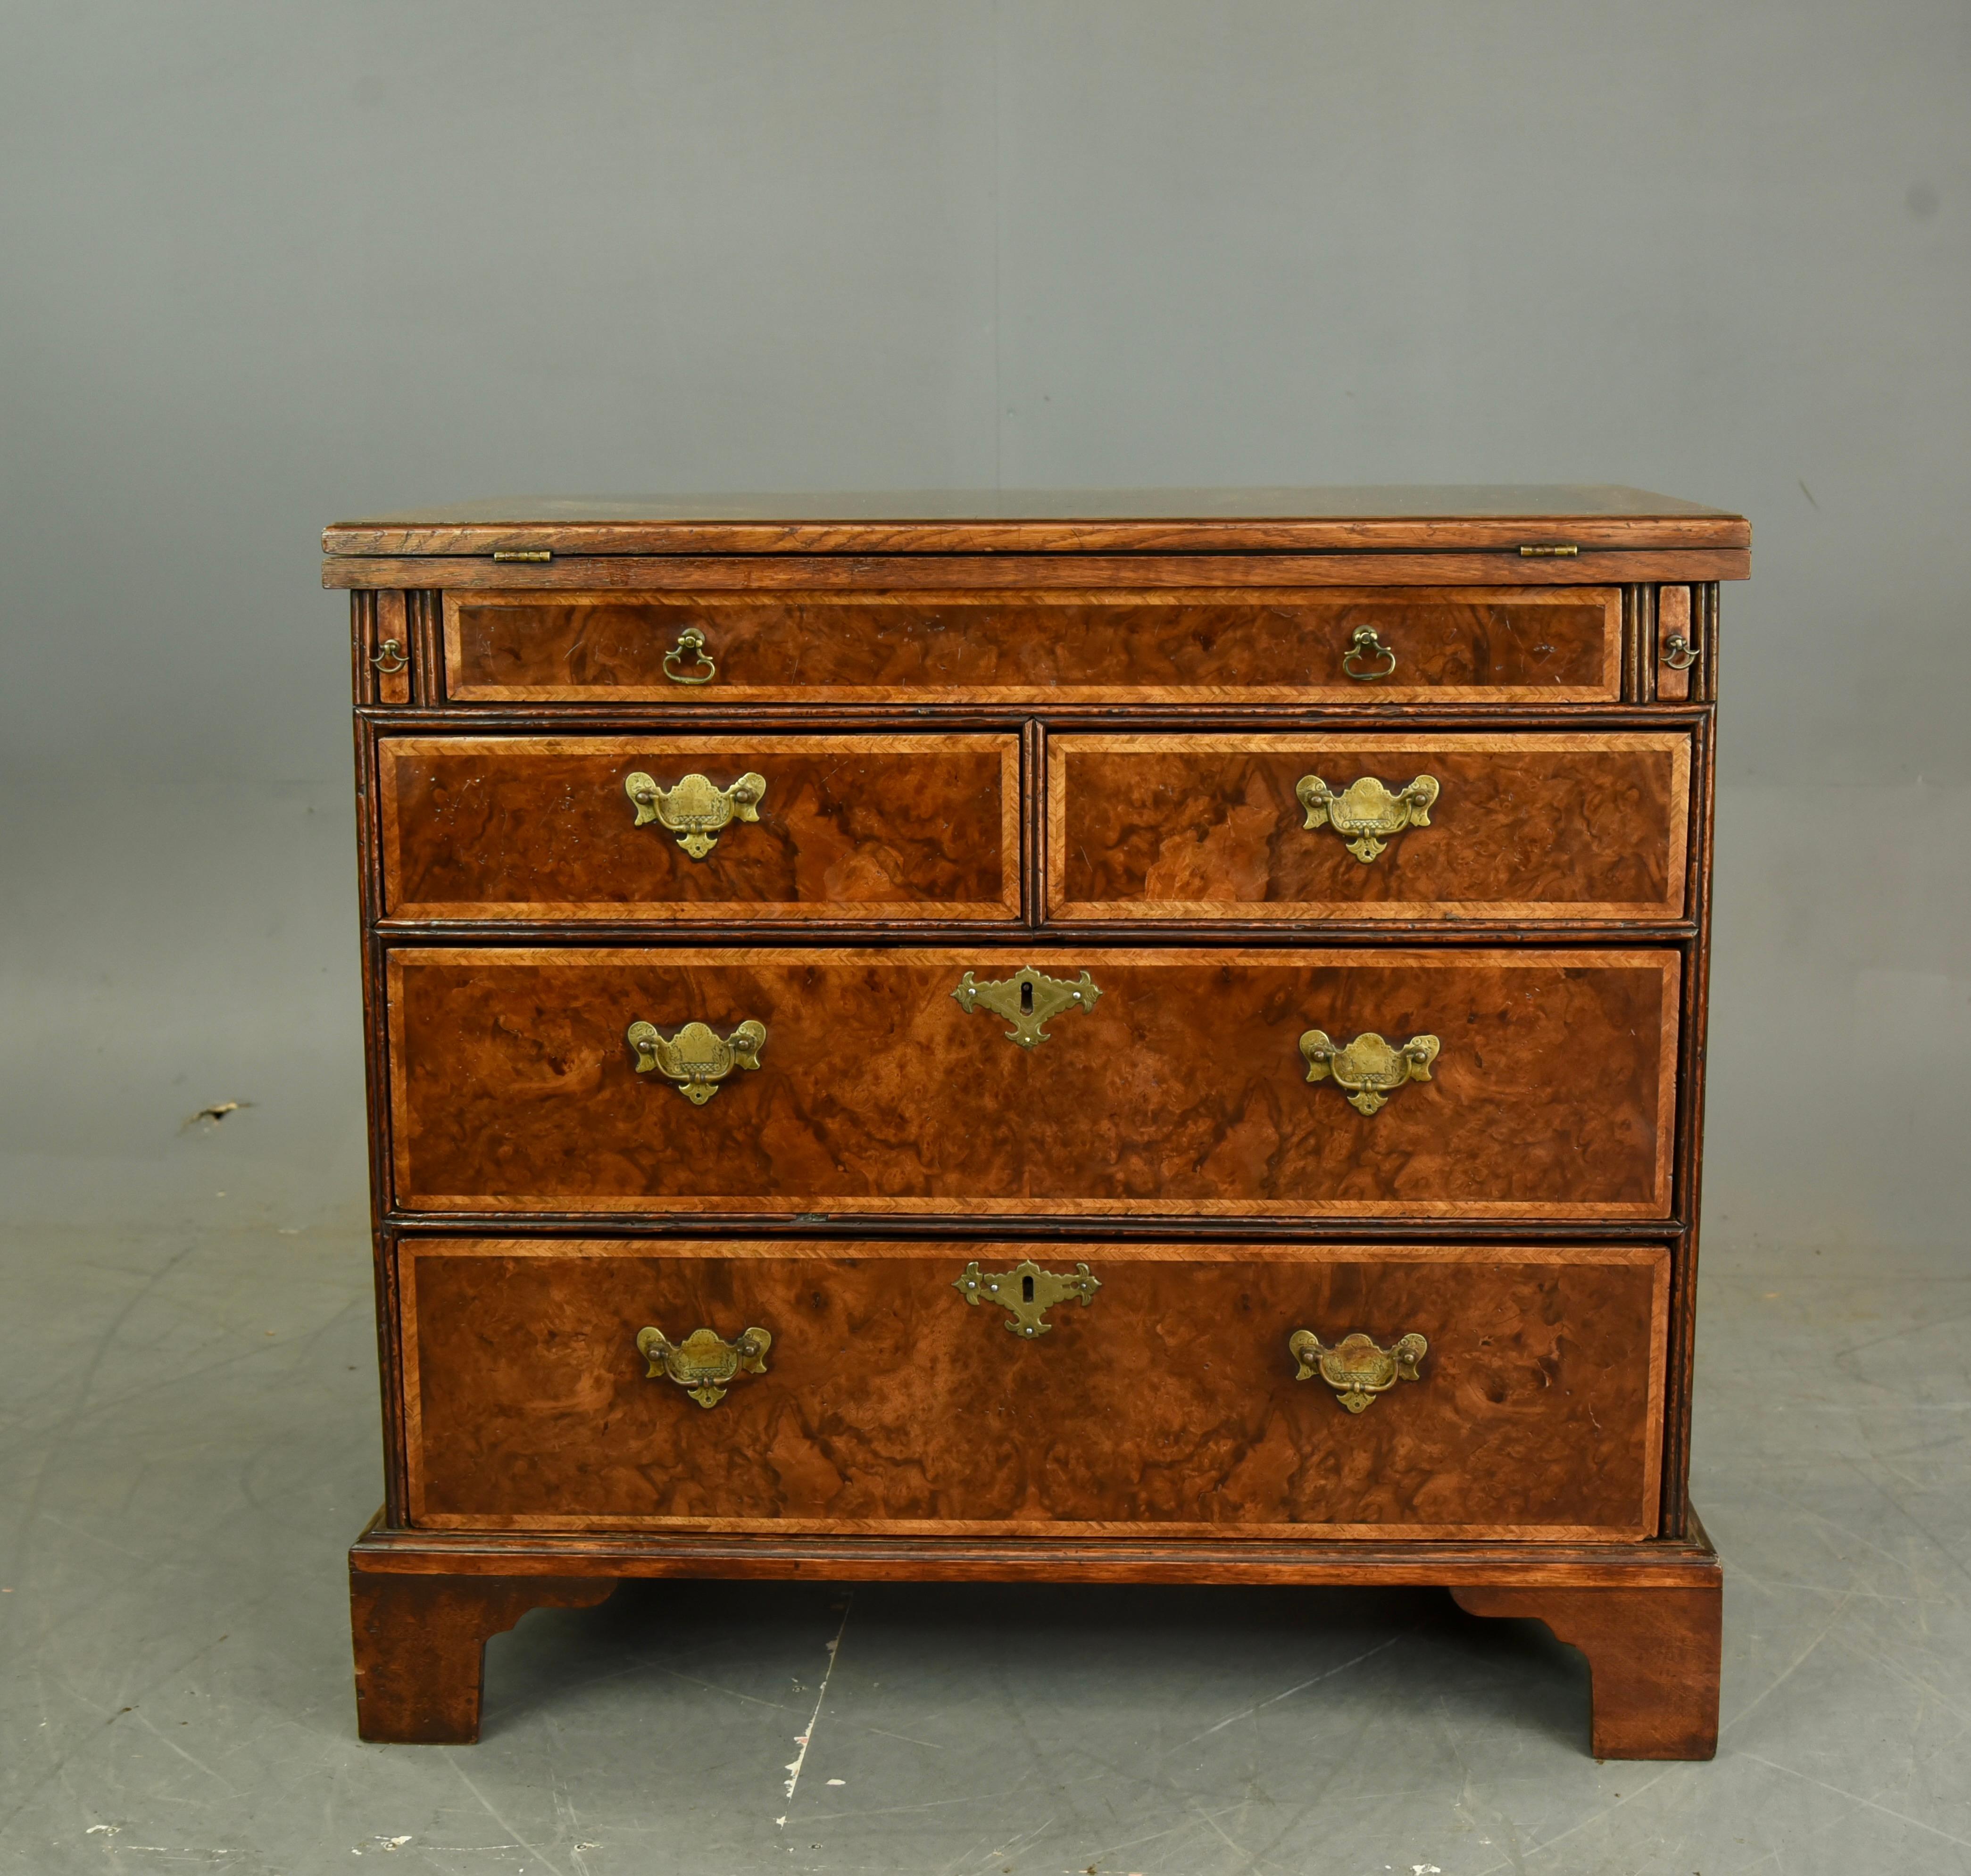 Wonderful Antique Georgian burr walnut bachelors chest of drawers .
The chest  has 5 oak and pine lined drawers with brass engraved plate handles (not original but early replacements ) ,it has a wonderful burr walnut grain and colour ,with a flip